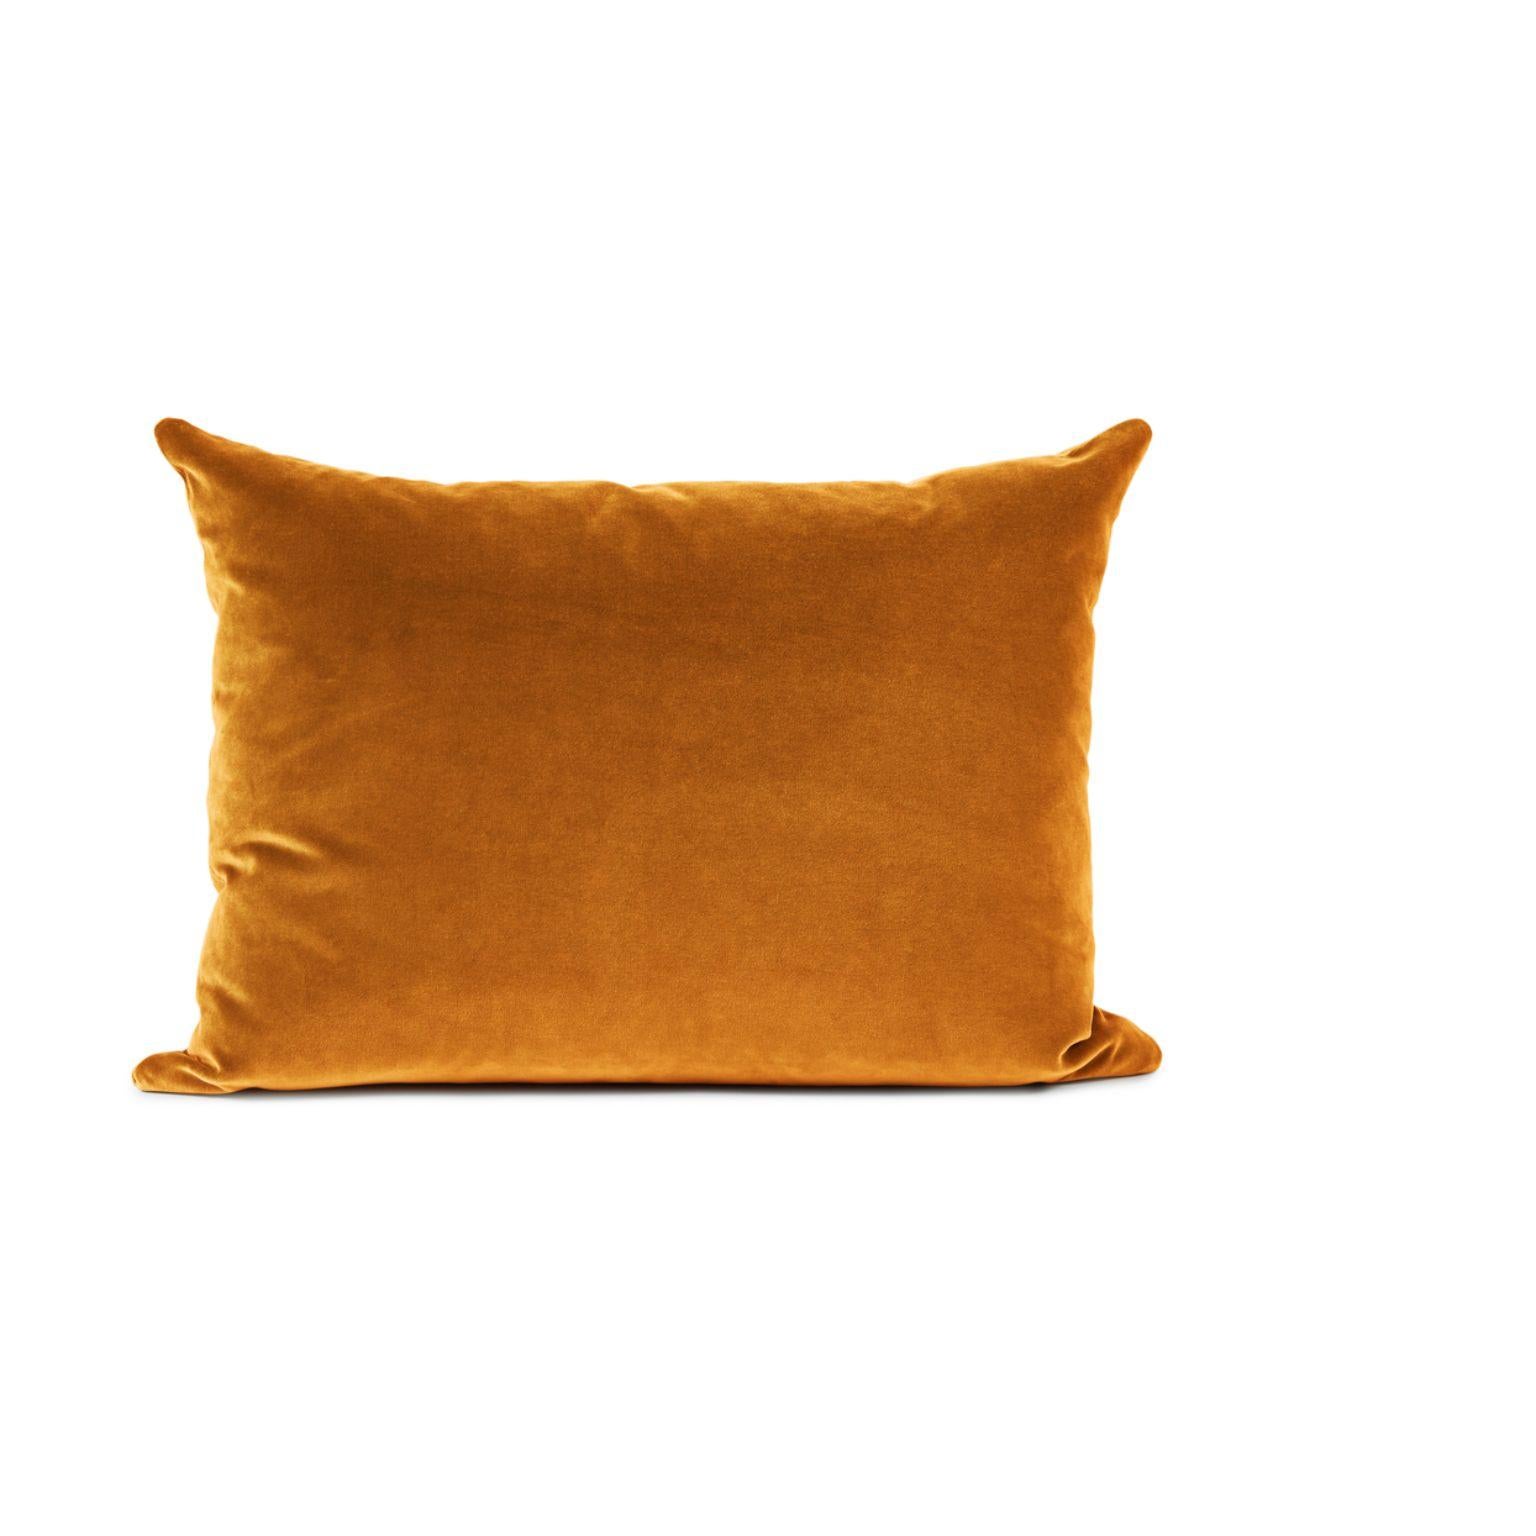 Galore cushion square amber by Warm Nordic
Dimensions: D70 x H 50 cm
Material: Textile upholstery, Granulate and feathers filling.
Weight: 1.4 kg.
Also available in different colours and finishes. 

An elegant oversized sofa cushion, which